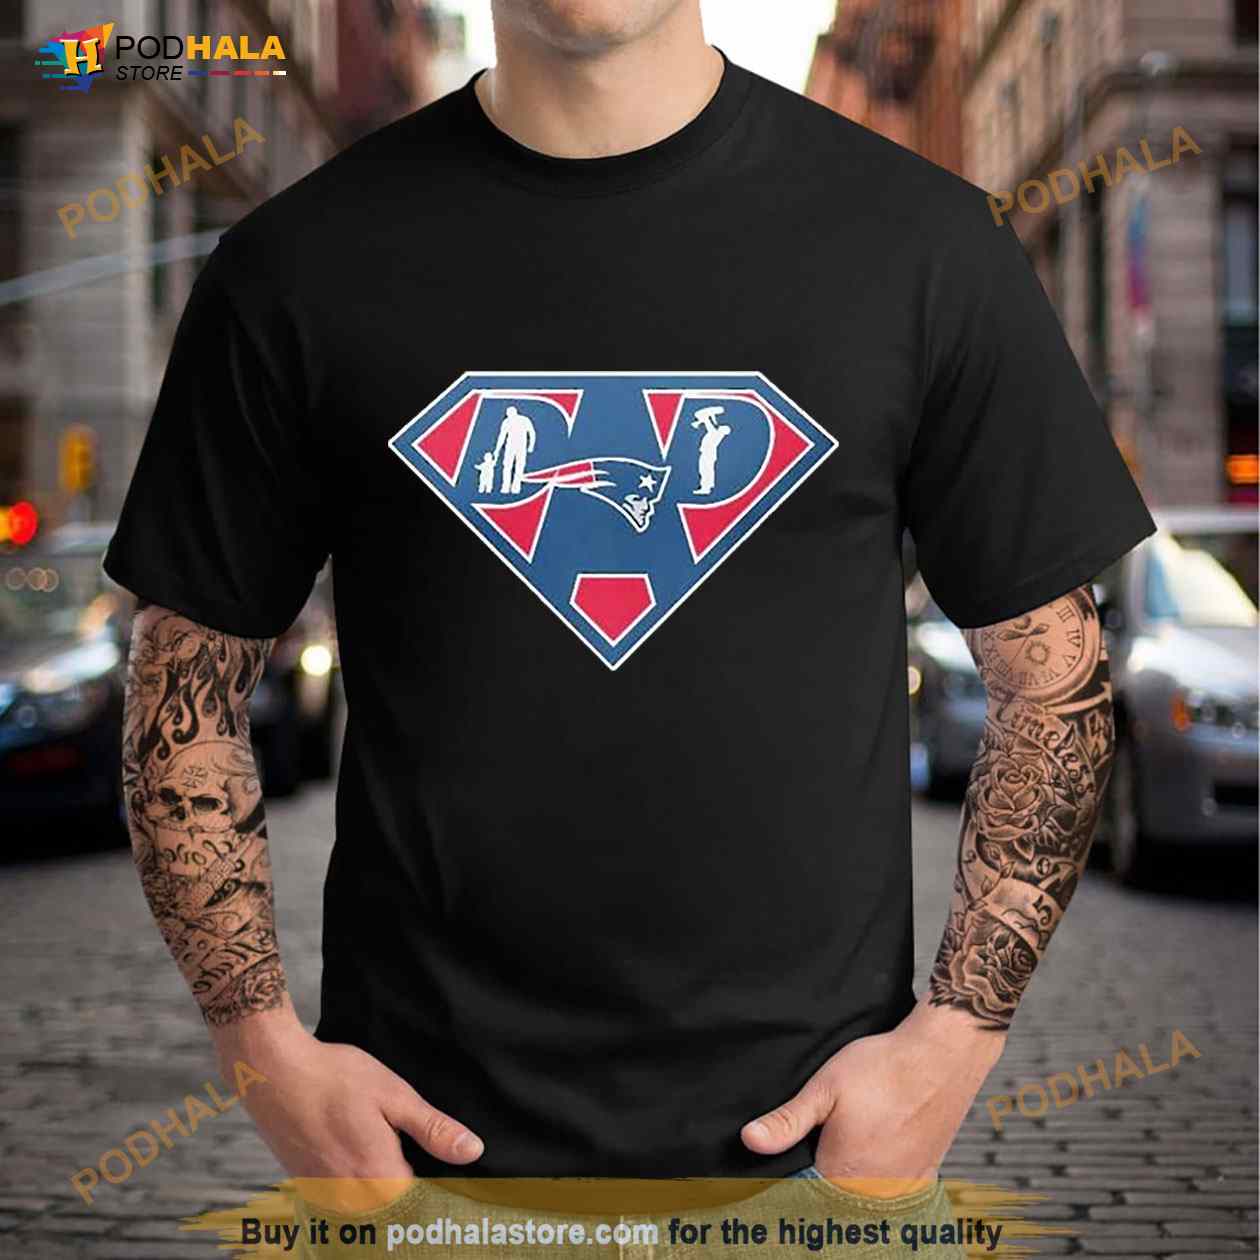 New England Patriots Super Dad Shirt - Bring Your Ideas, Thoughts